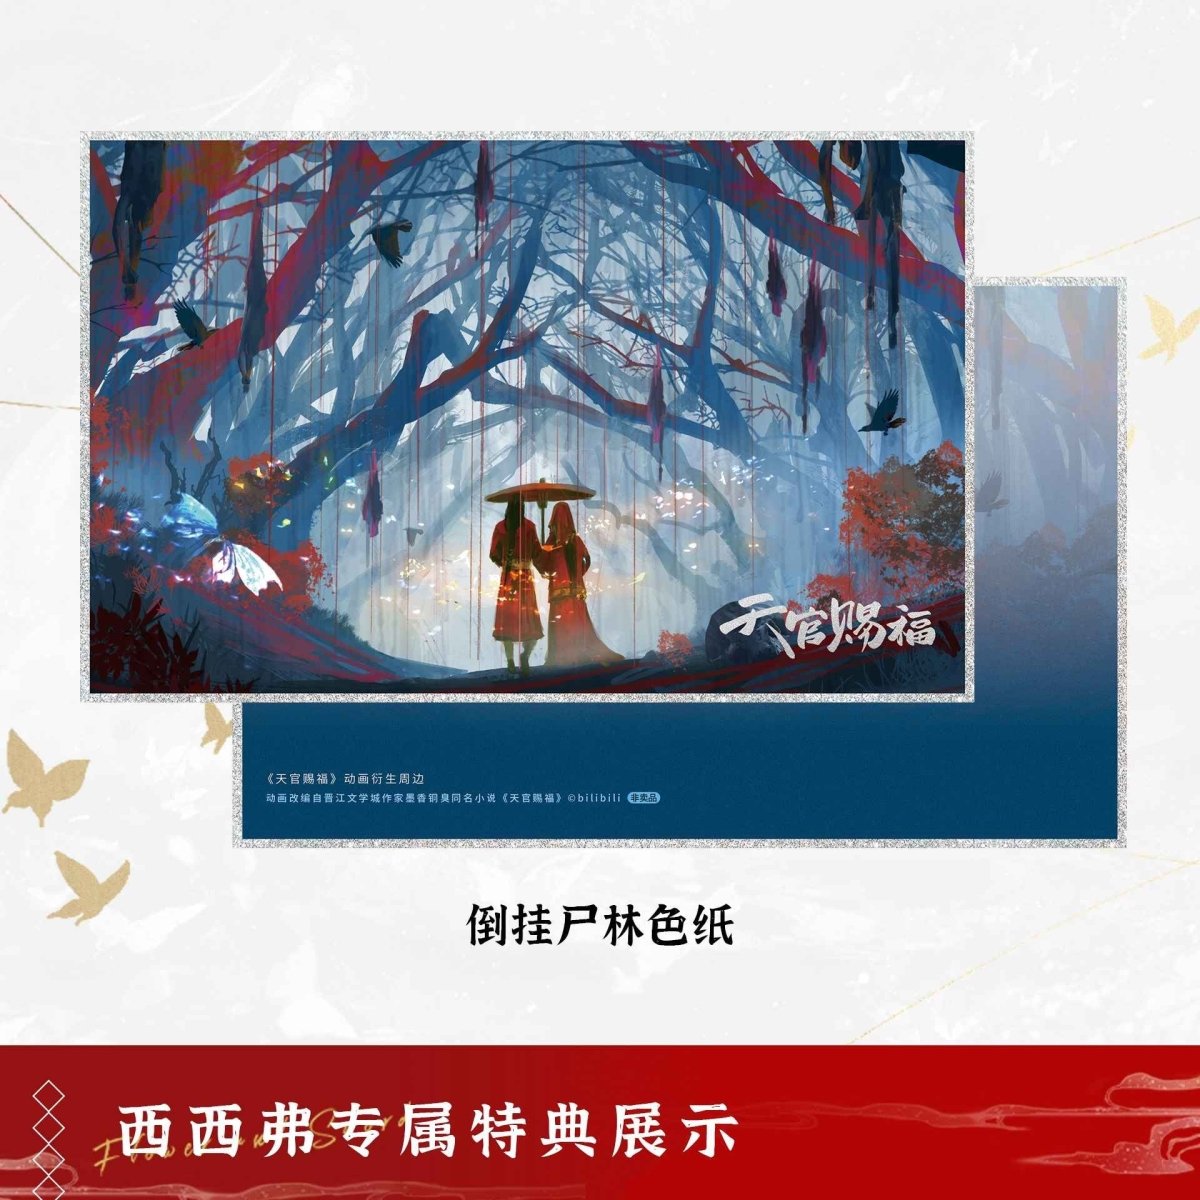 Heaven Official's Blessing | One Flower, One Sword: Tian Guan Ci Fu Animation Book Bilibili Comic- FUNIMECITY